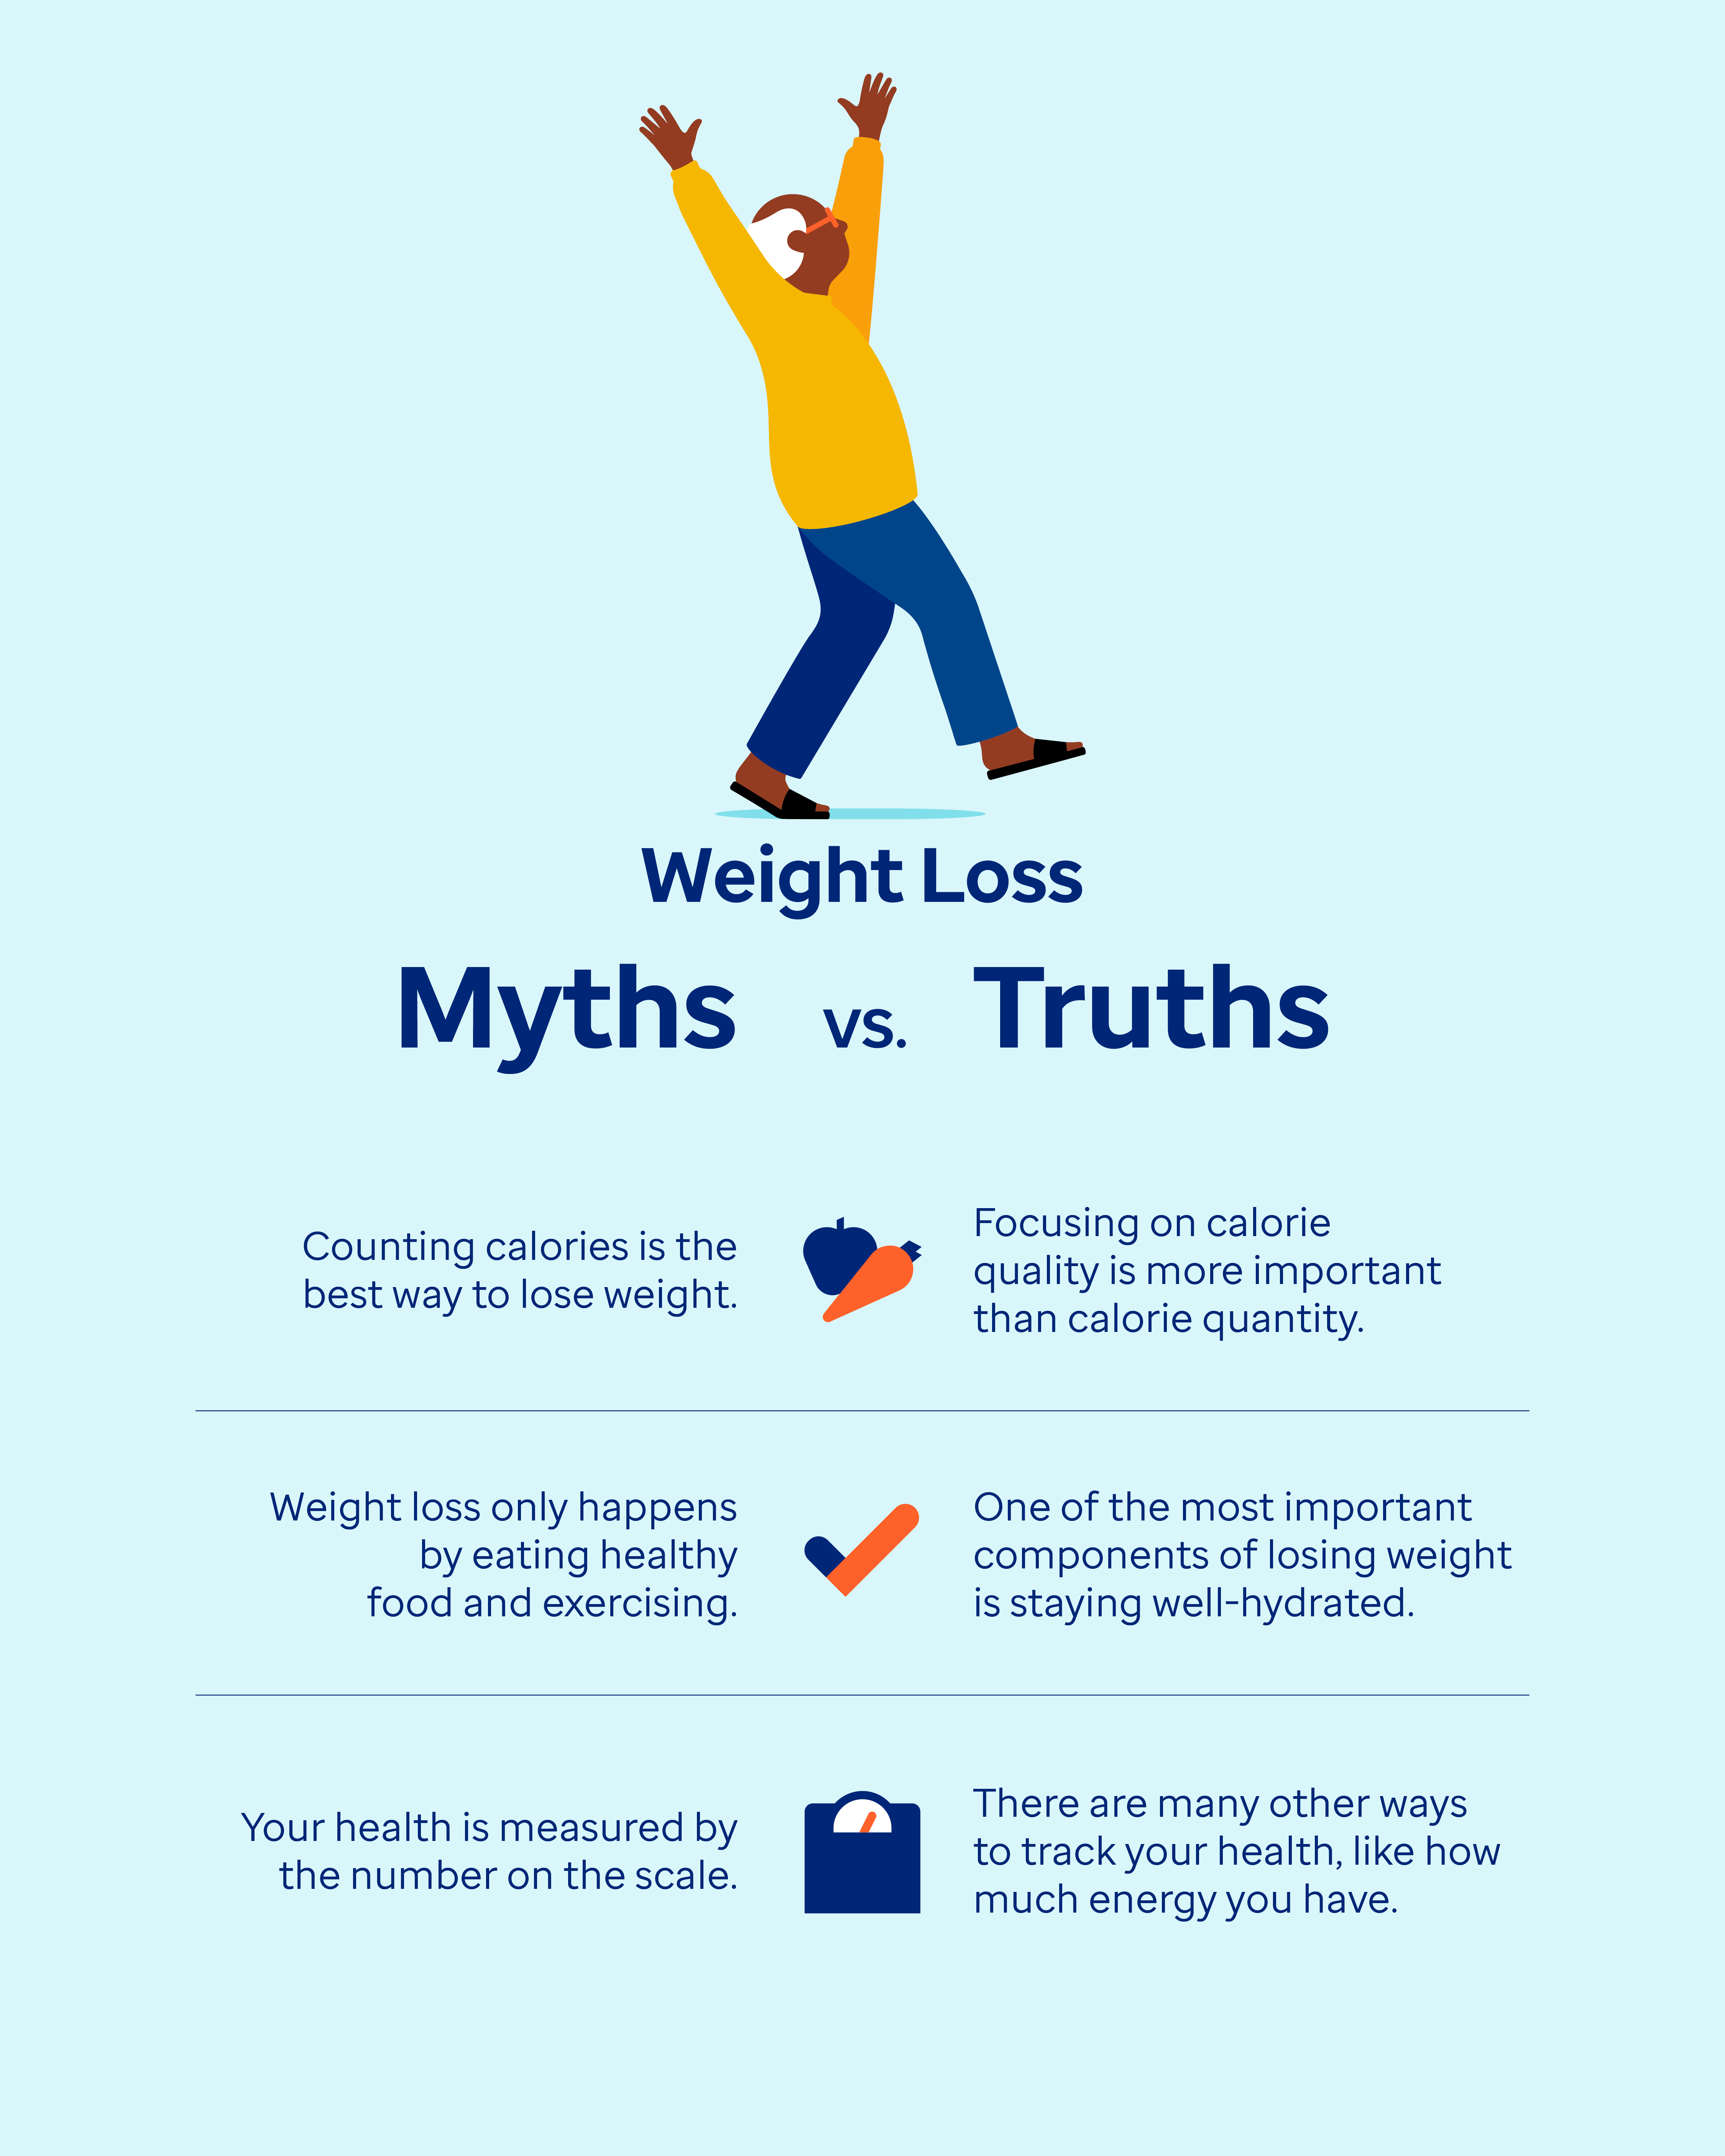 Weight loss myths